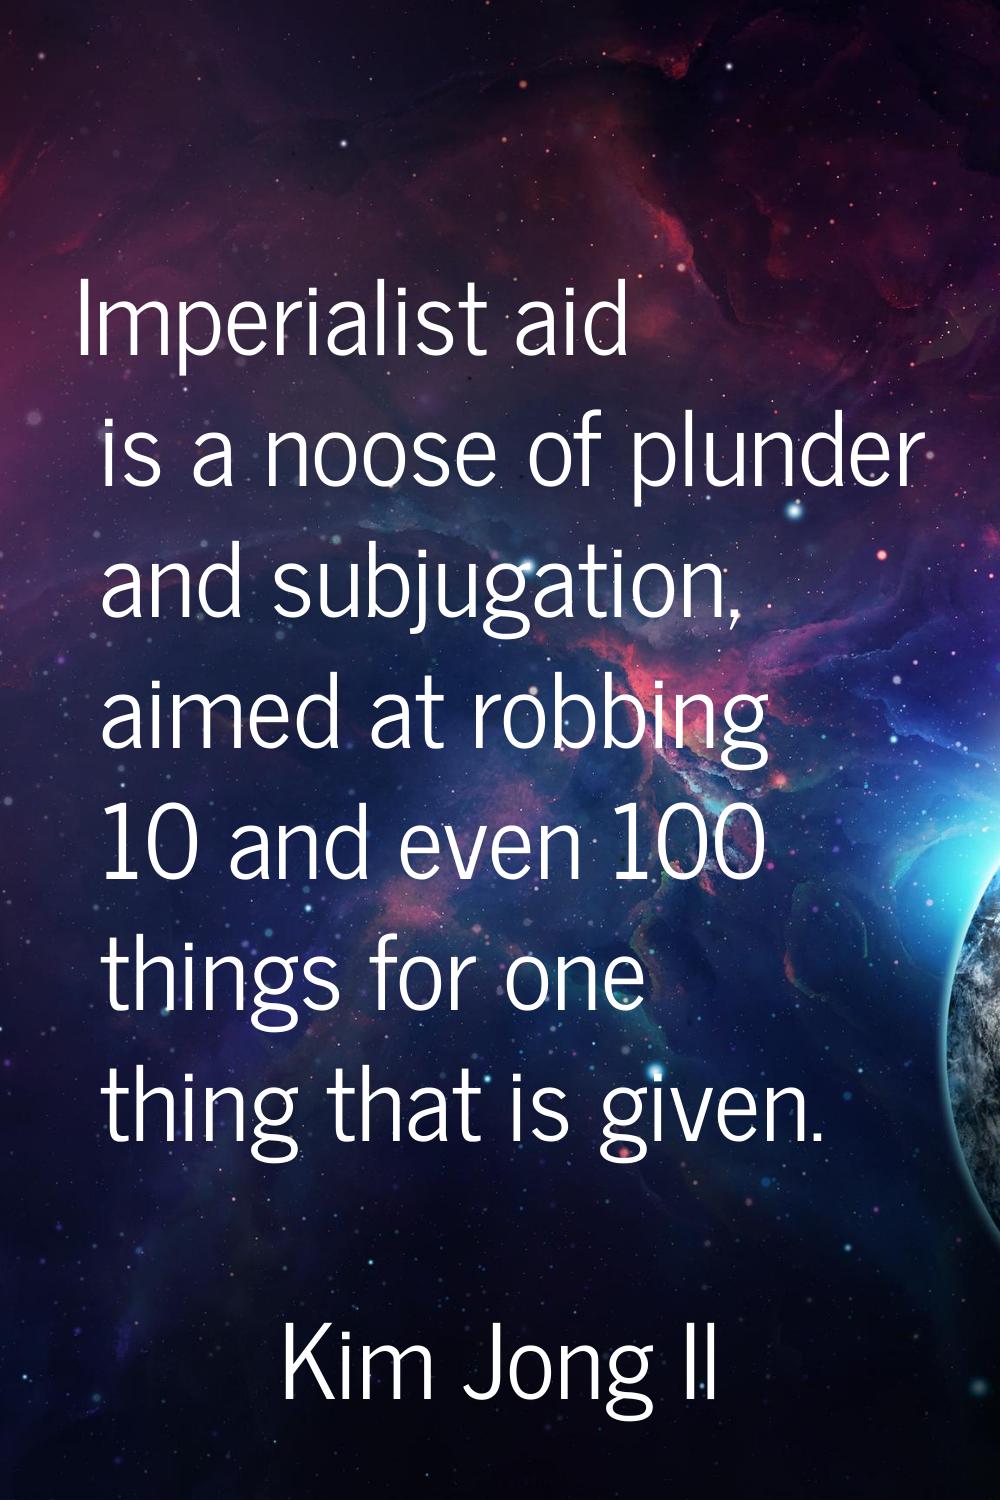 Imperialist aid is a noose of plunder and subjugation, aimed at robbing 10 and even 100 things for 